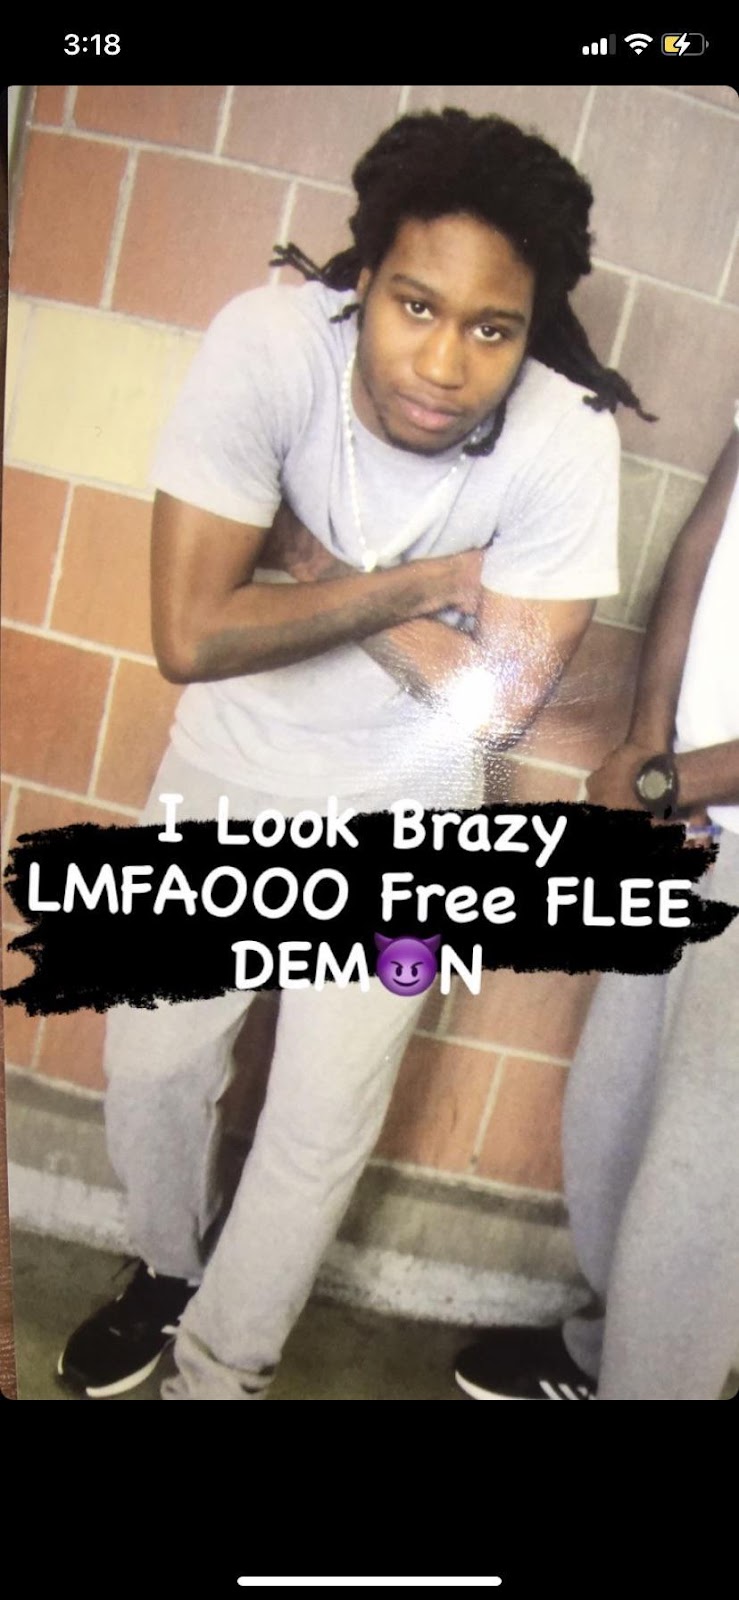 r/NYStateOfMind - Lee Drilly jail pic free em